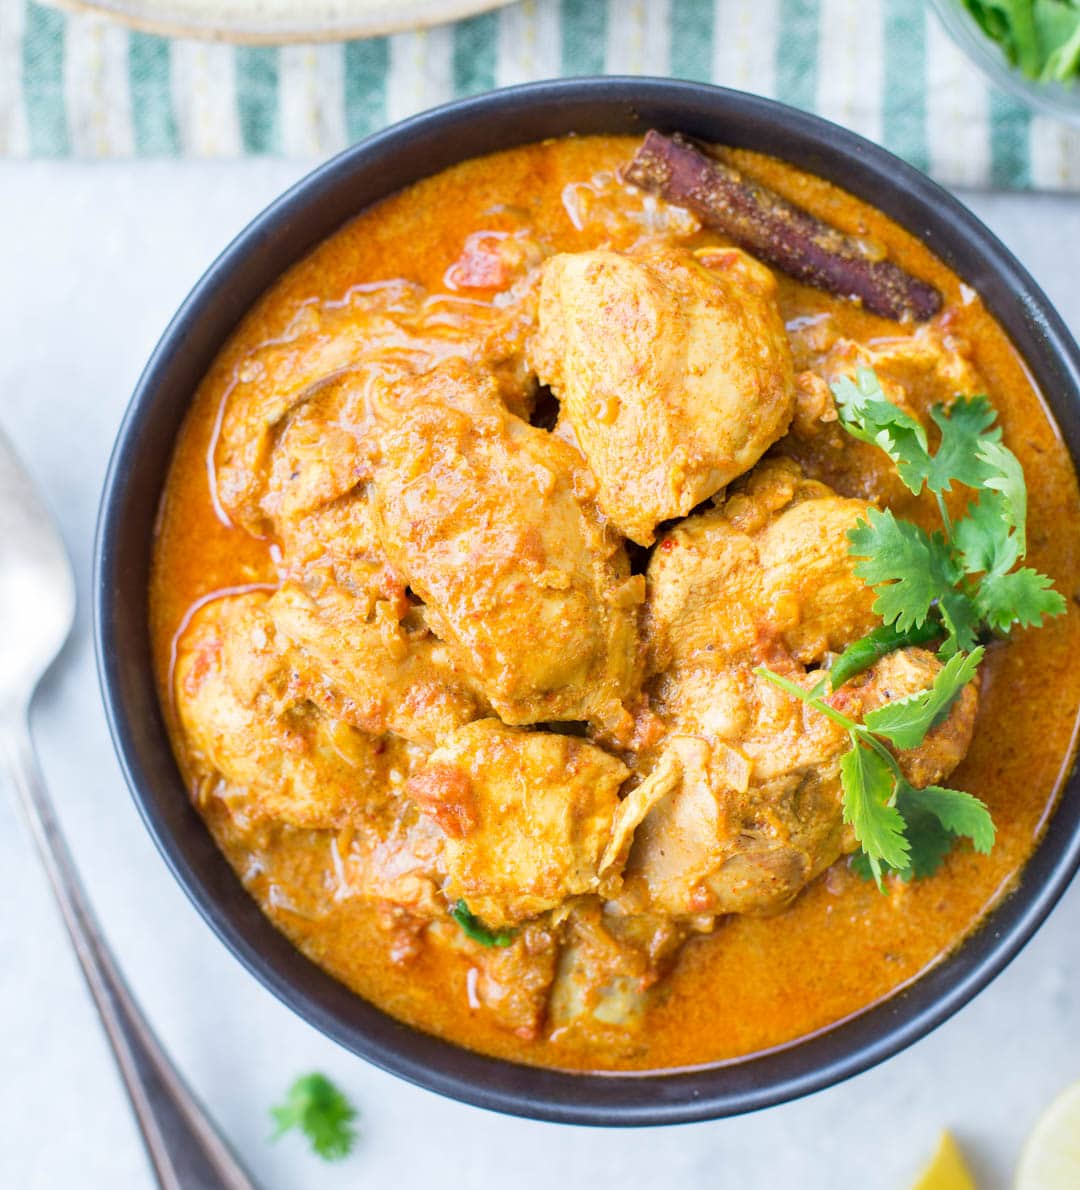 SLOW COOKER COCONUT CHICKEN CURRY - The flavours of kitchen